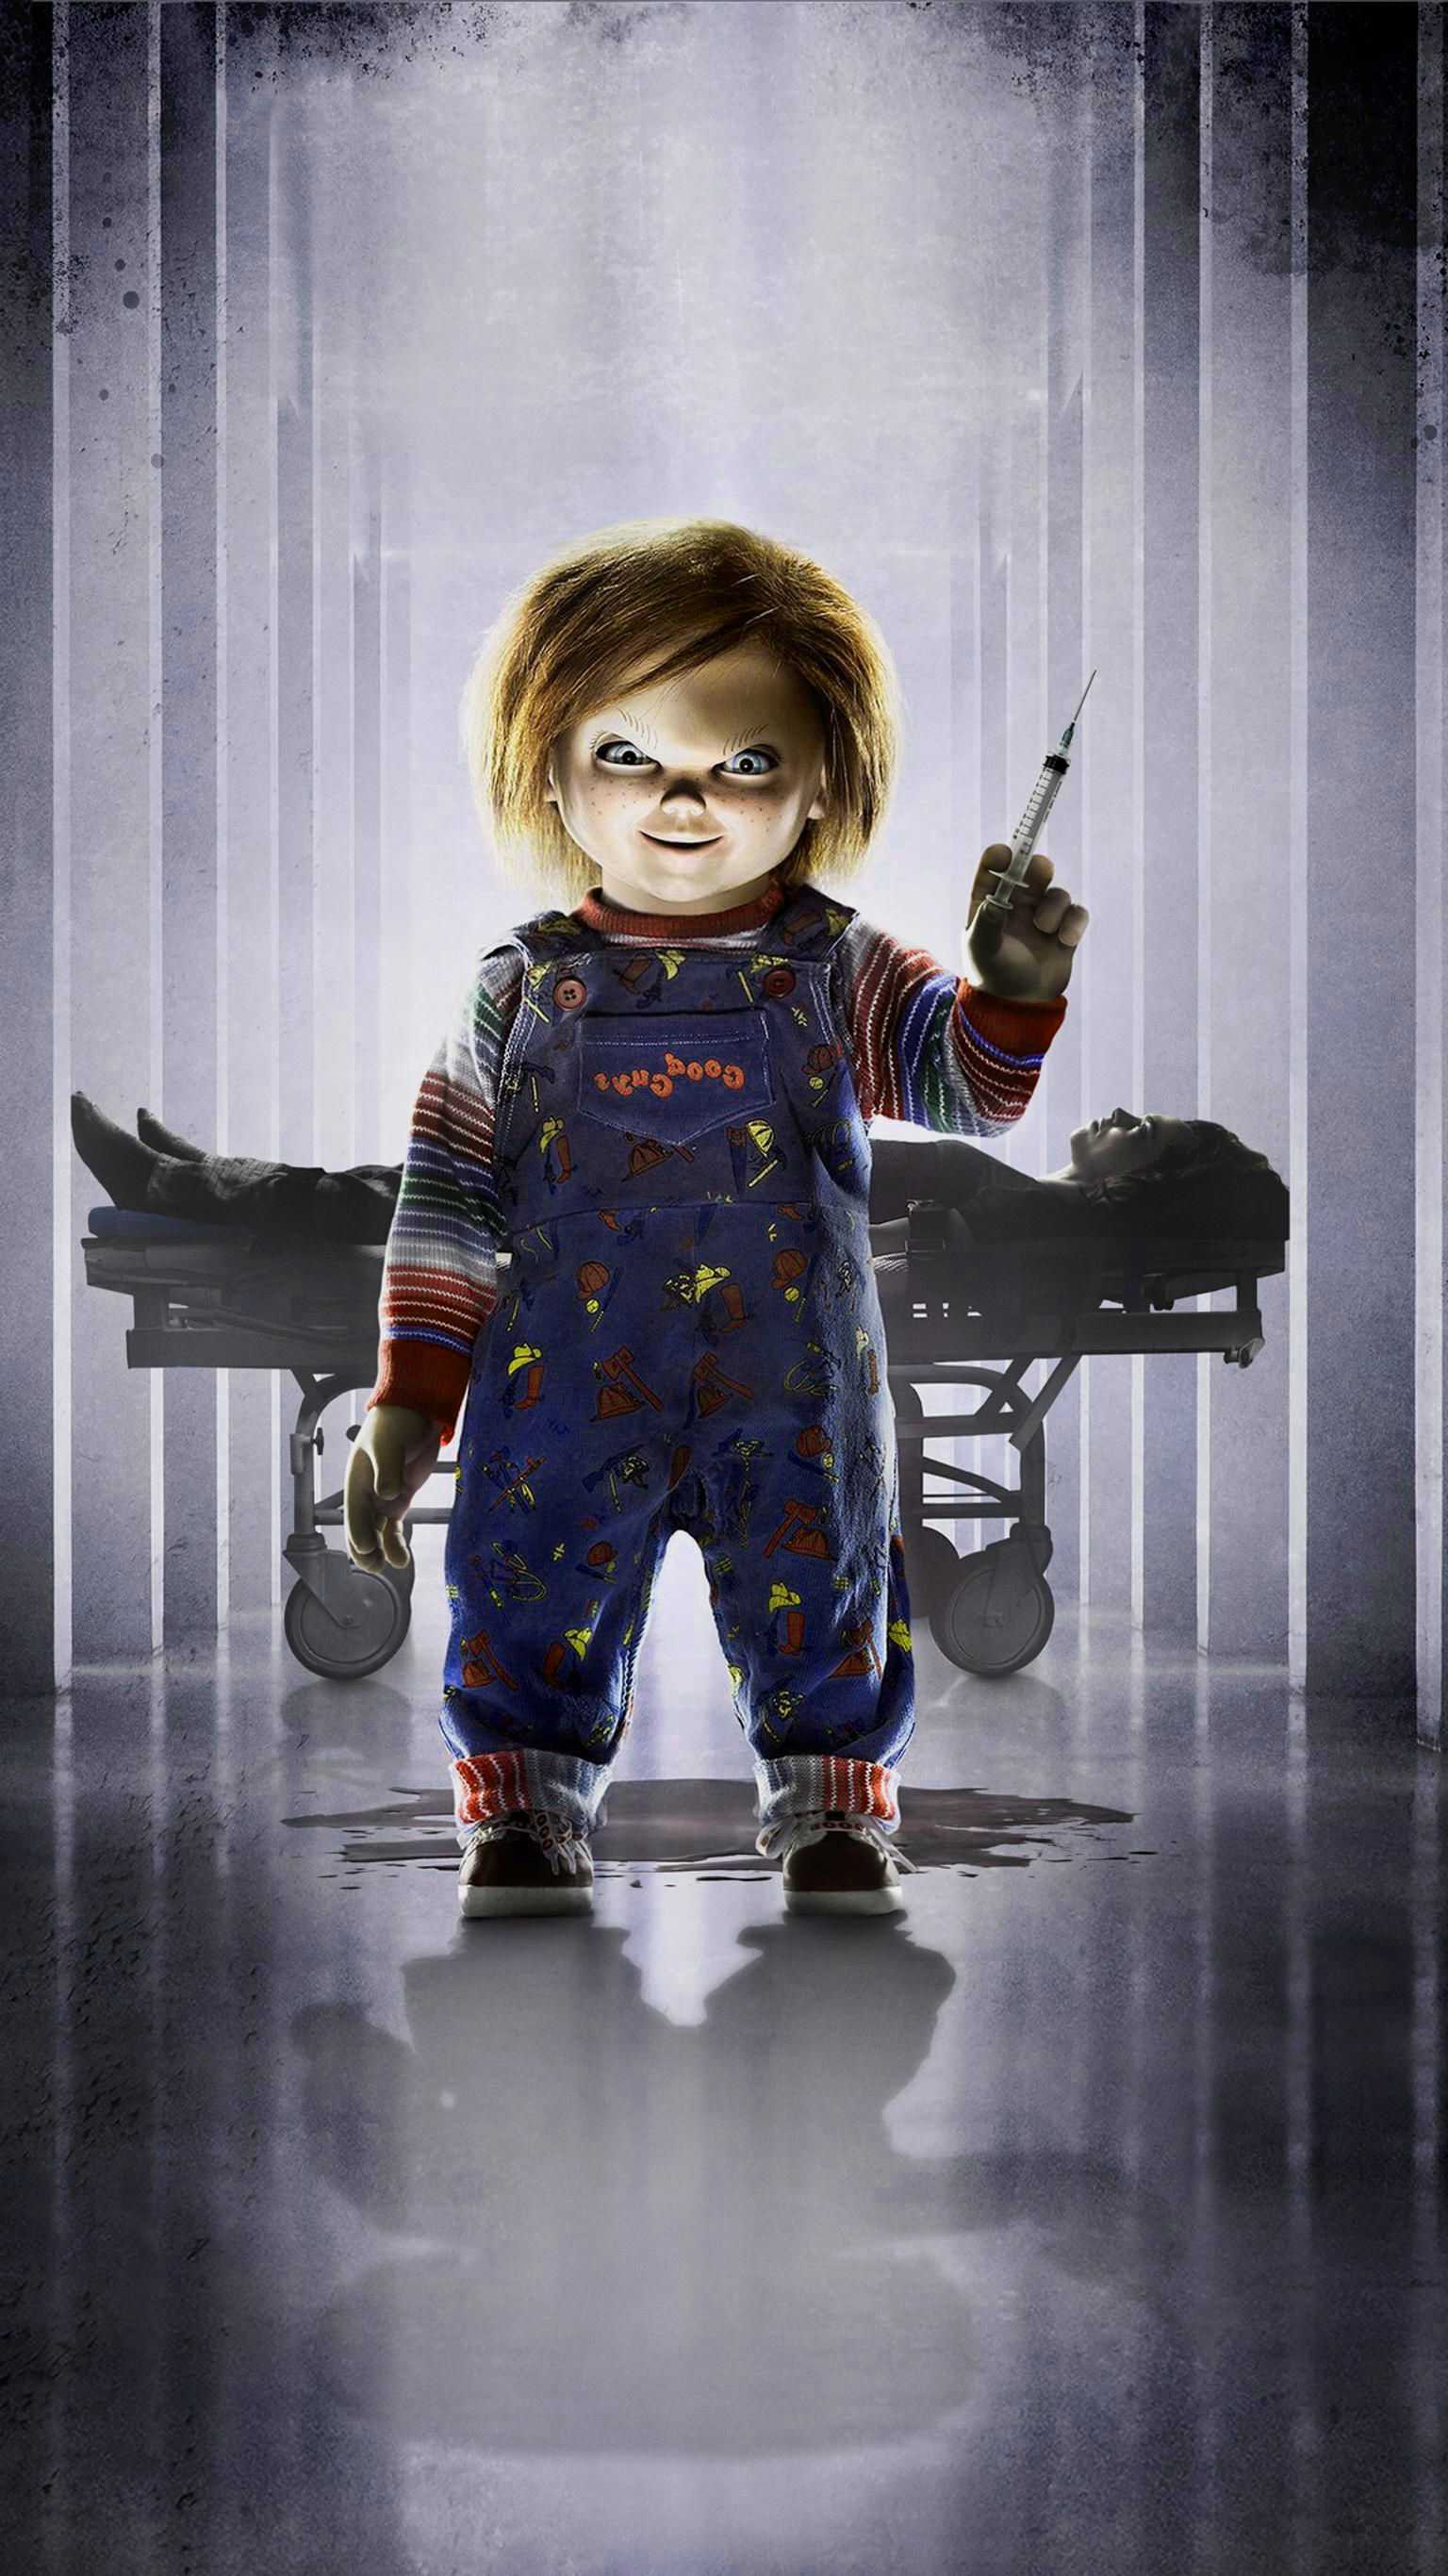 Chucky HD Wallpapers 1000 Free Chucky Wallpaper Images For All Devices